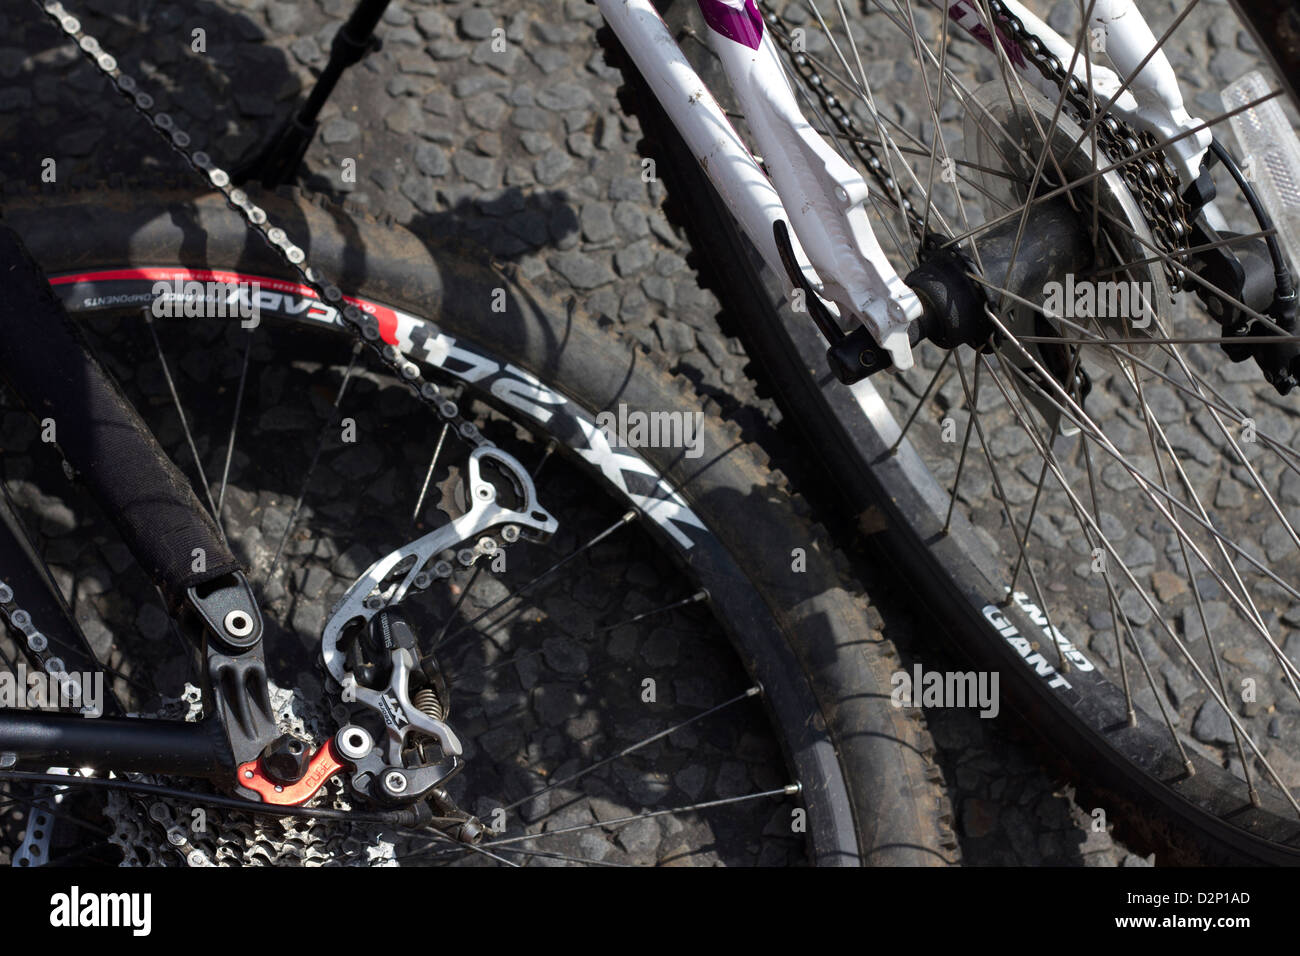 Cycle wheels, chains and derailleur. Stock Photo